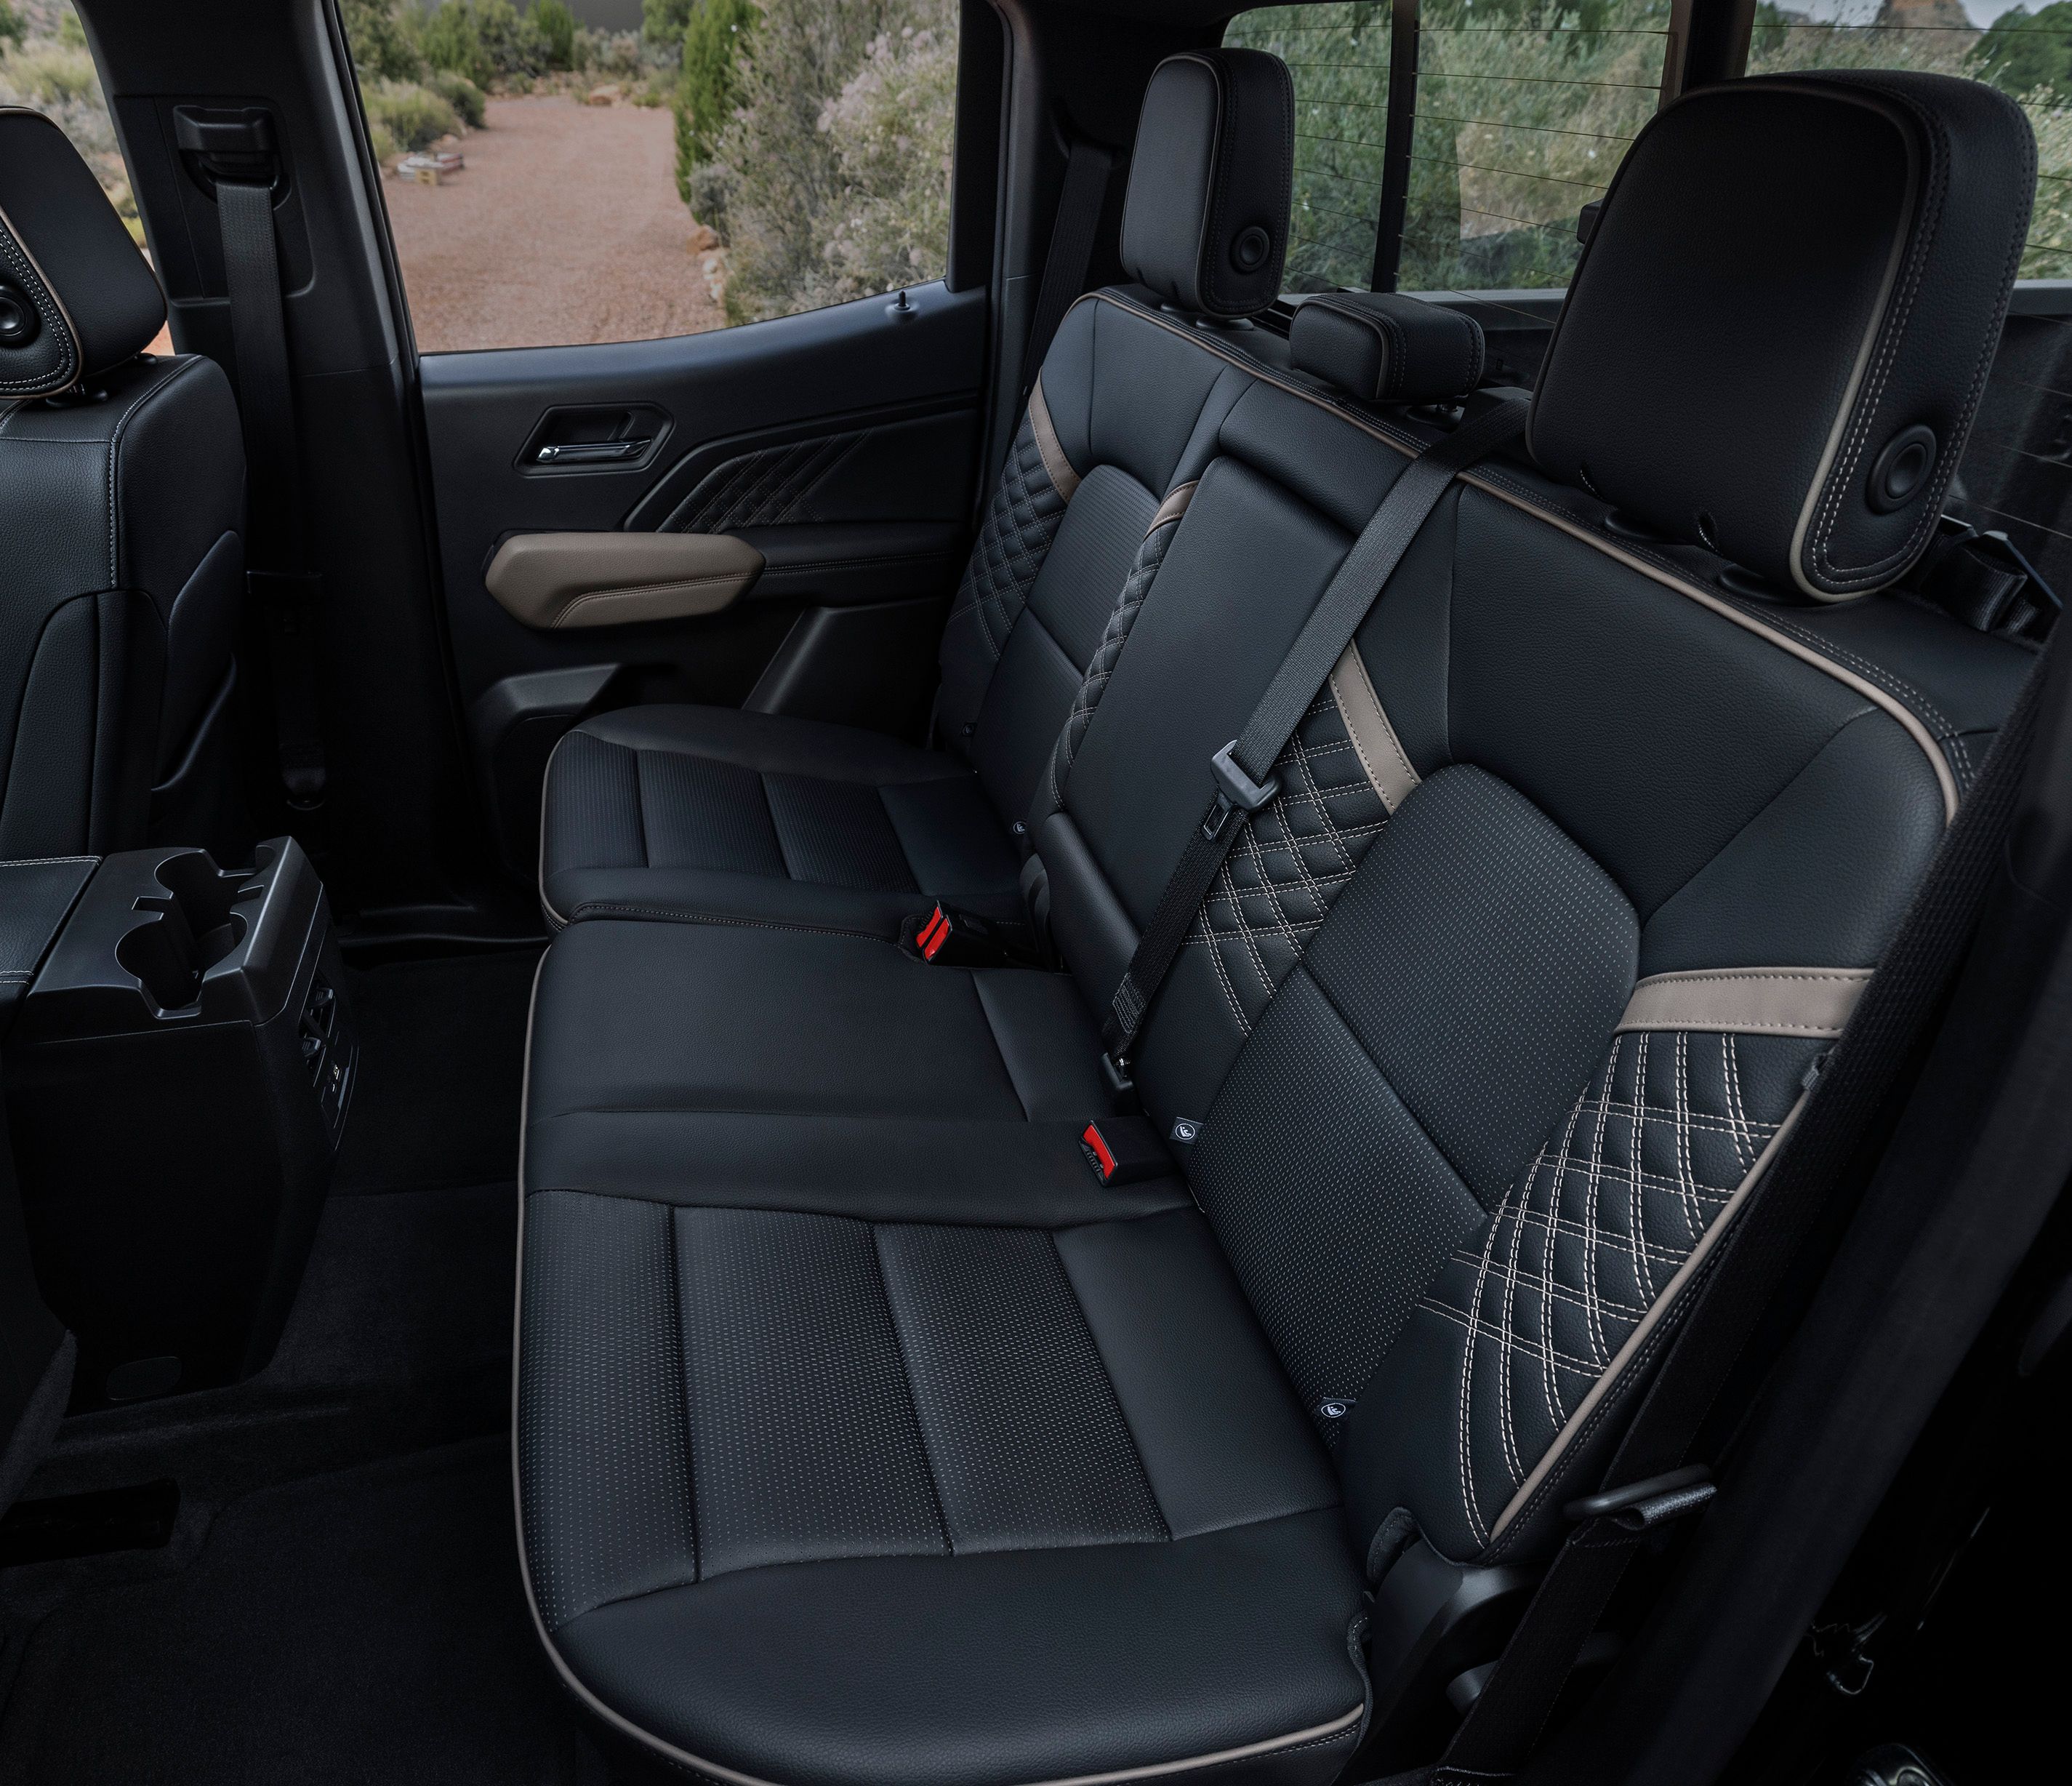 The rear seating area of the 2023 GMC Canyon Denali